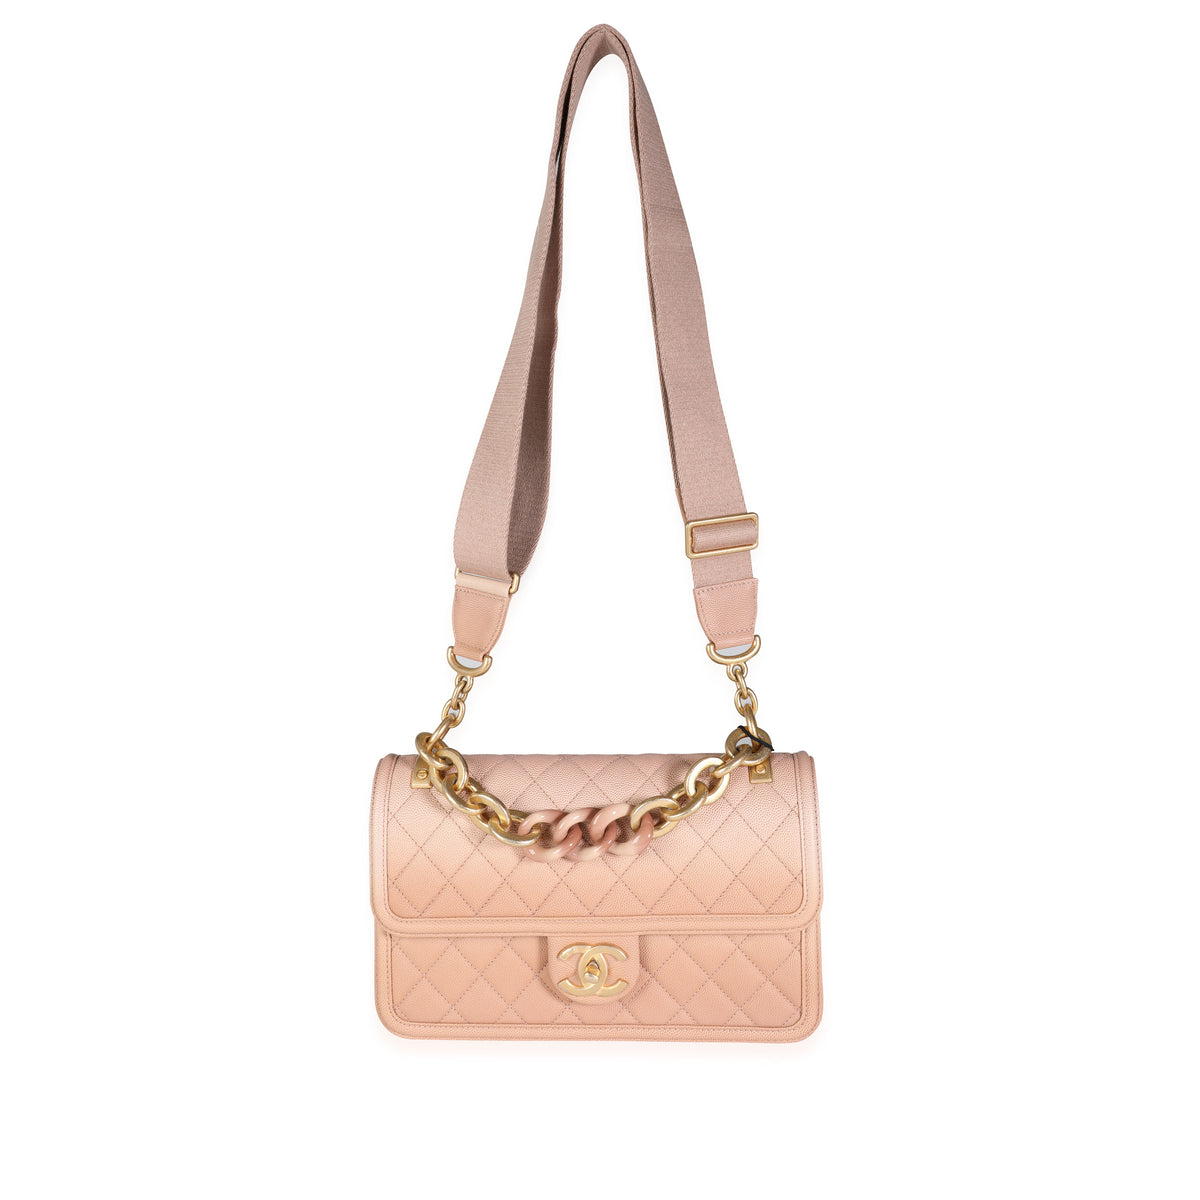 Chanel Beige Ombré Quilted Caviar Sunset By The Sea Bag, myGemma